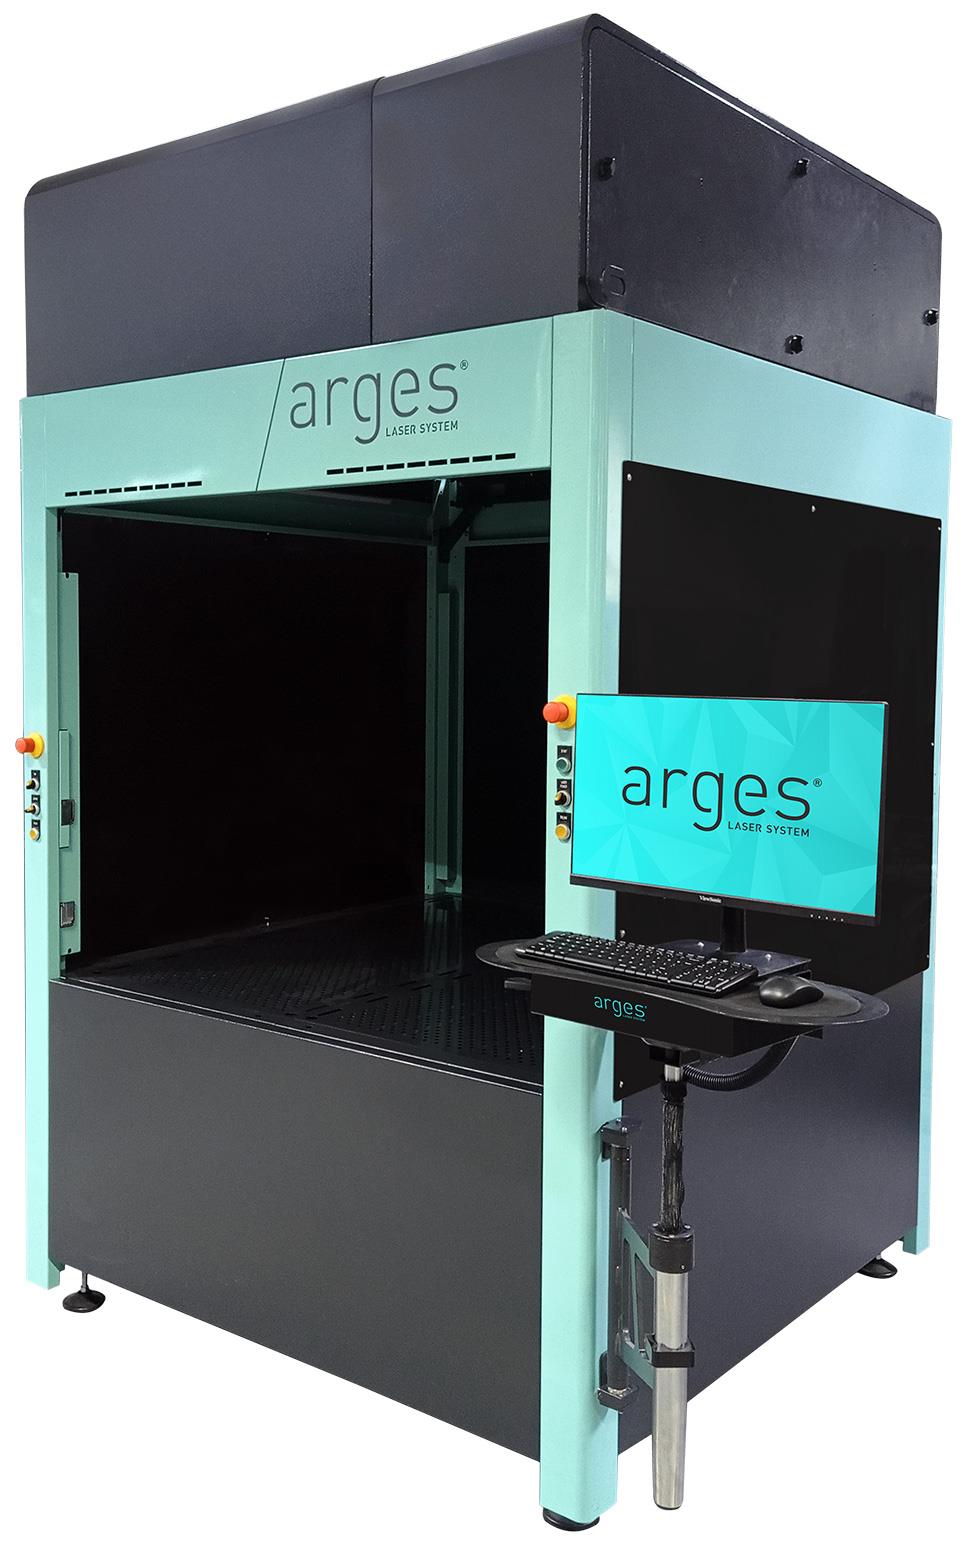 Arges Smart Marking and Etching